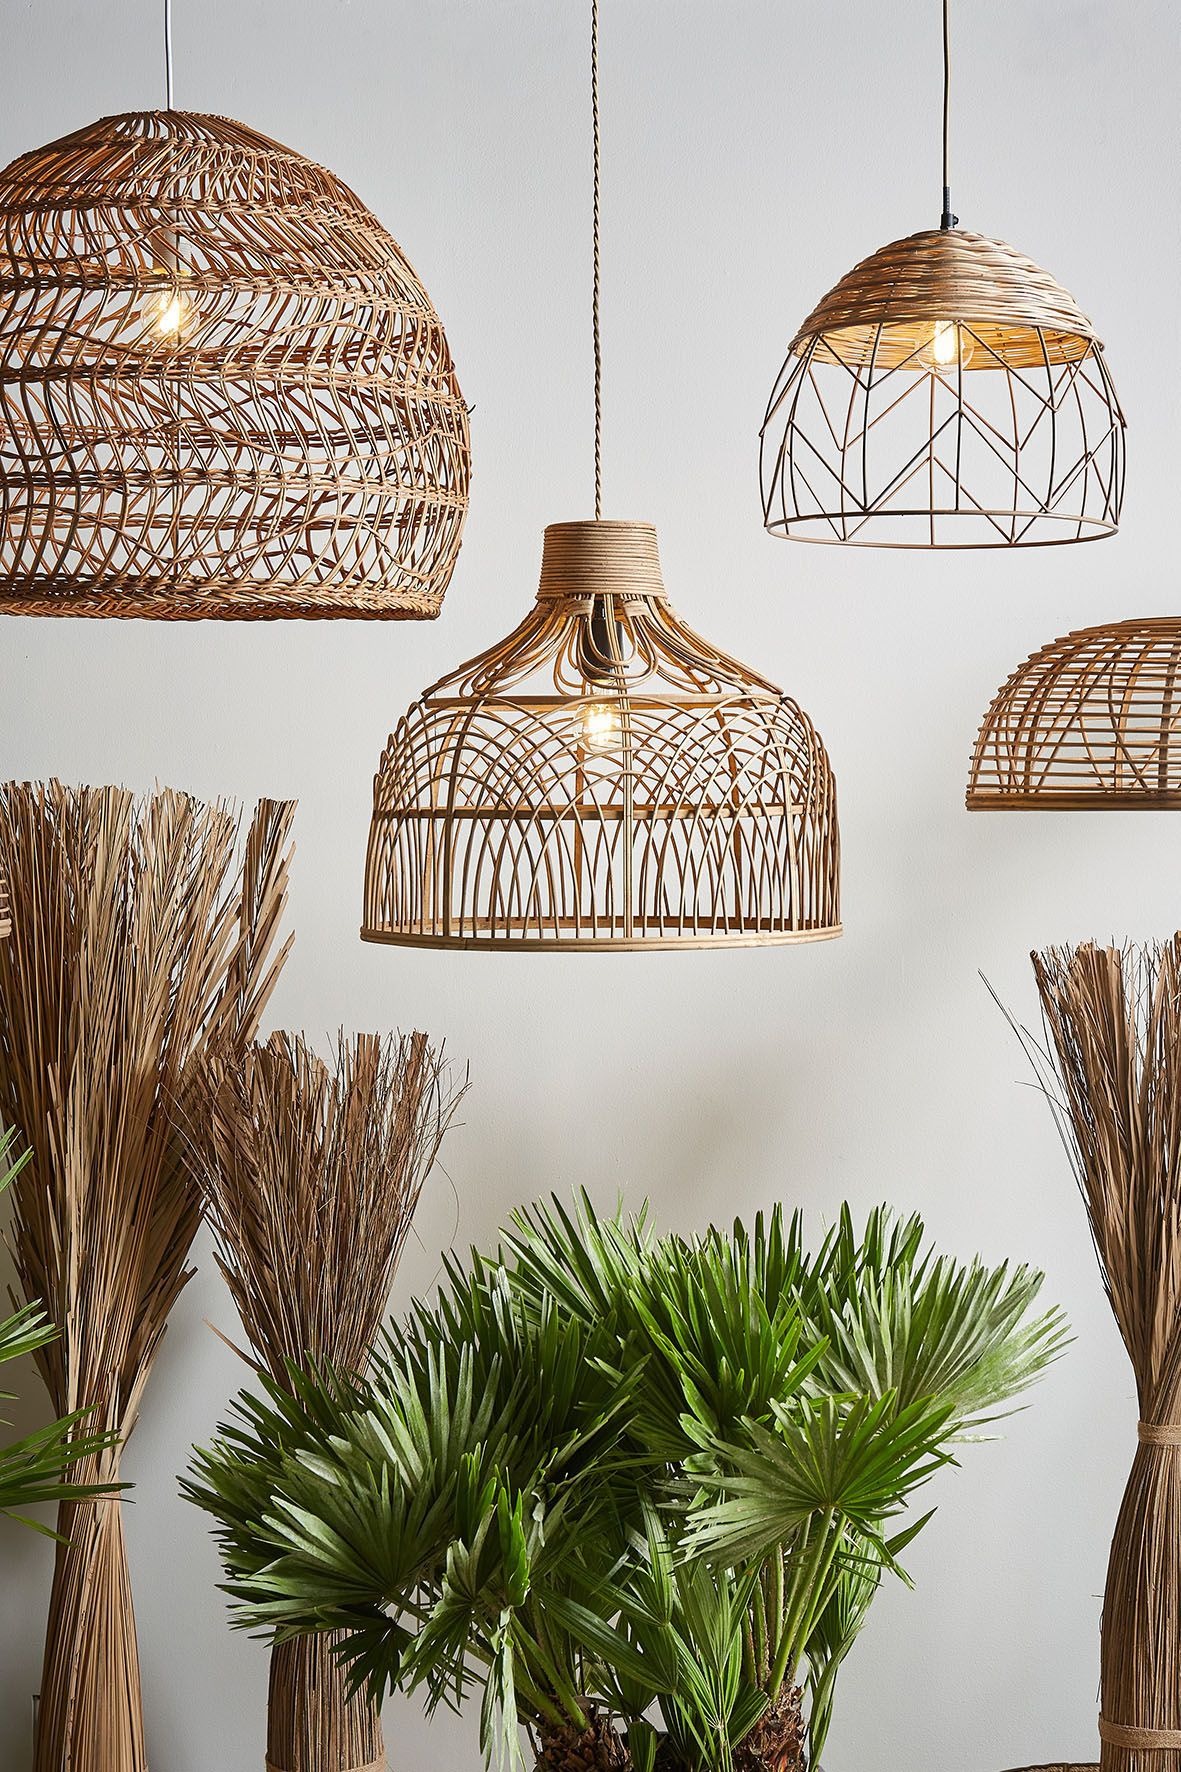 Rattan is an Interesting Lampshade